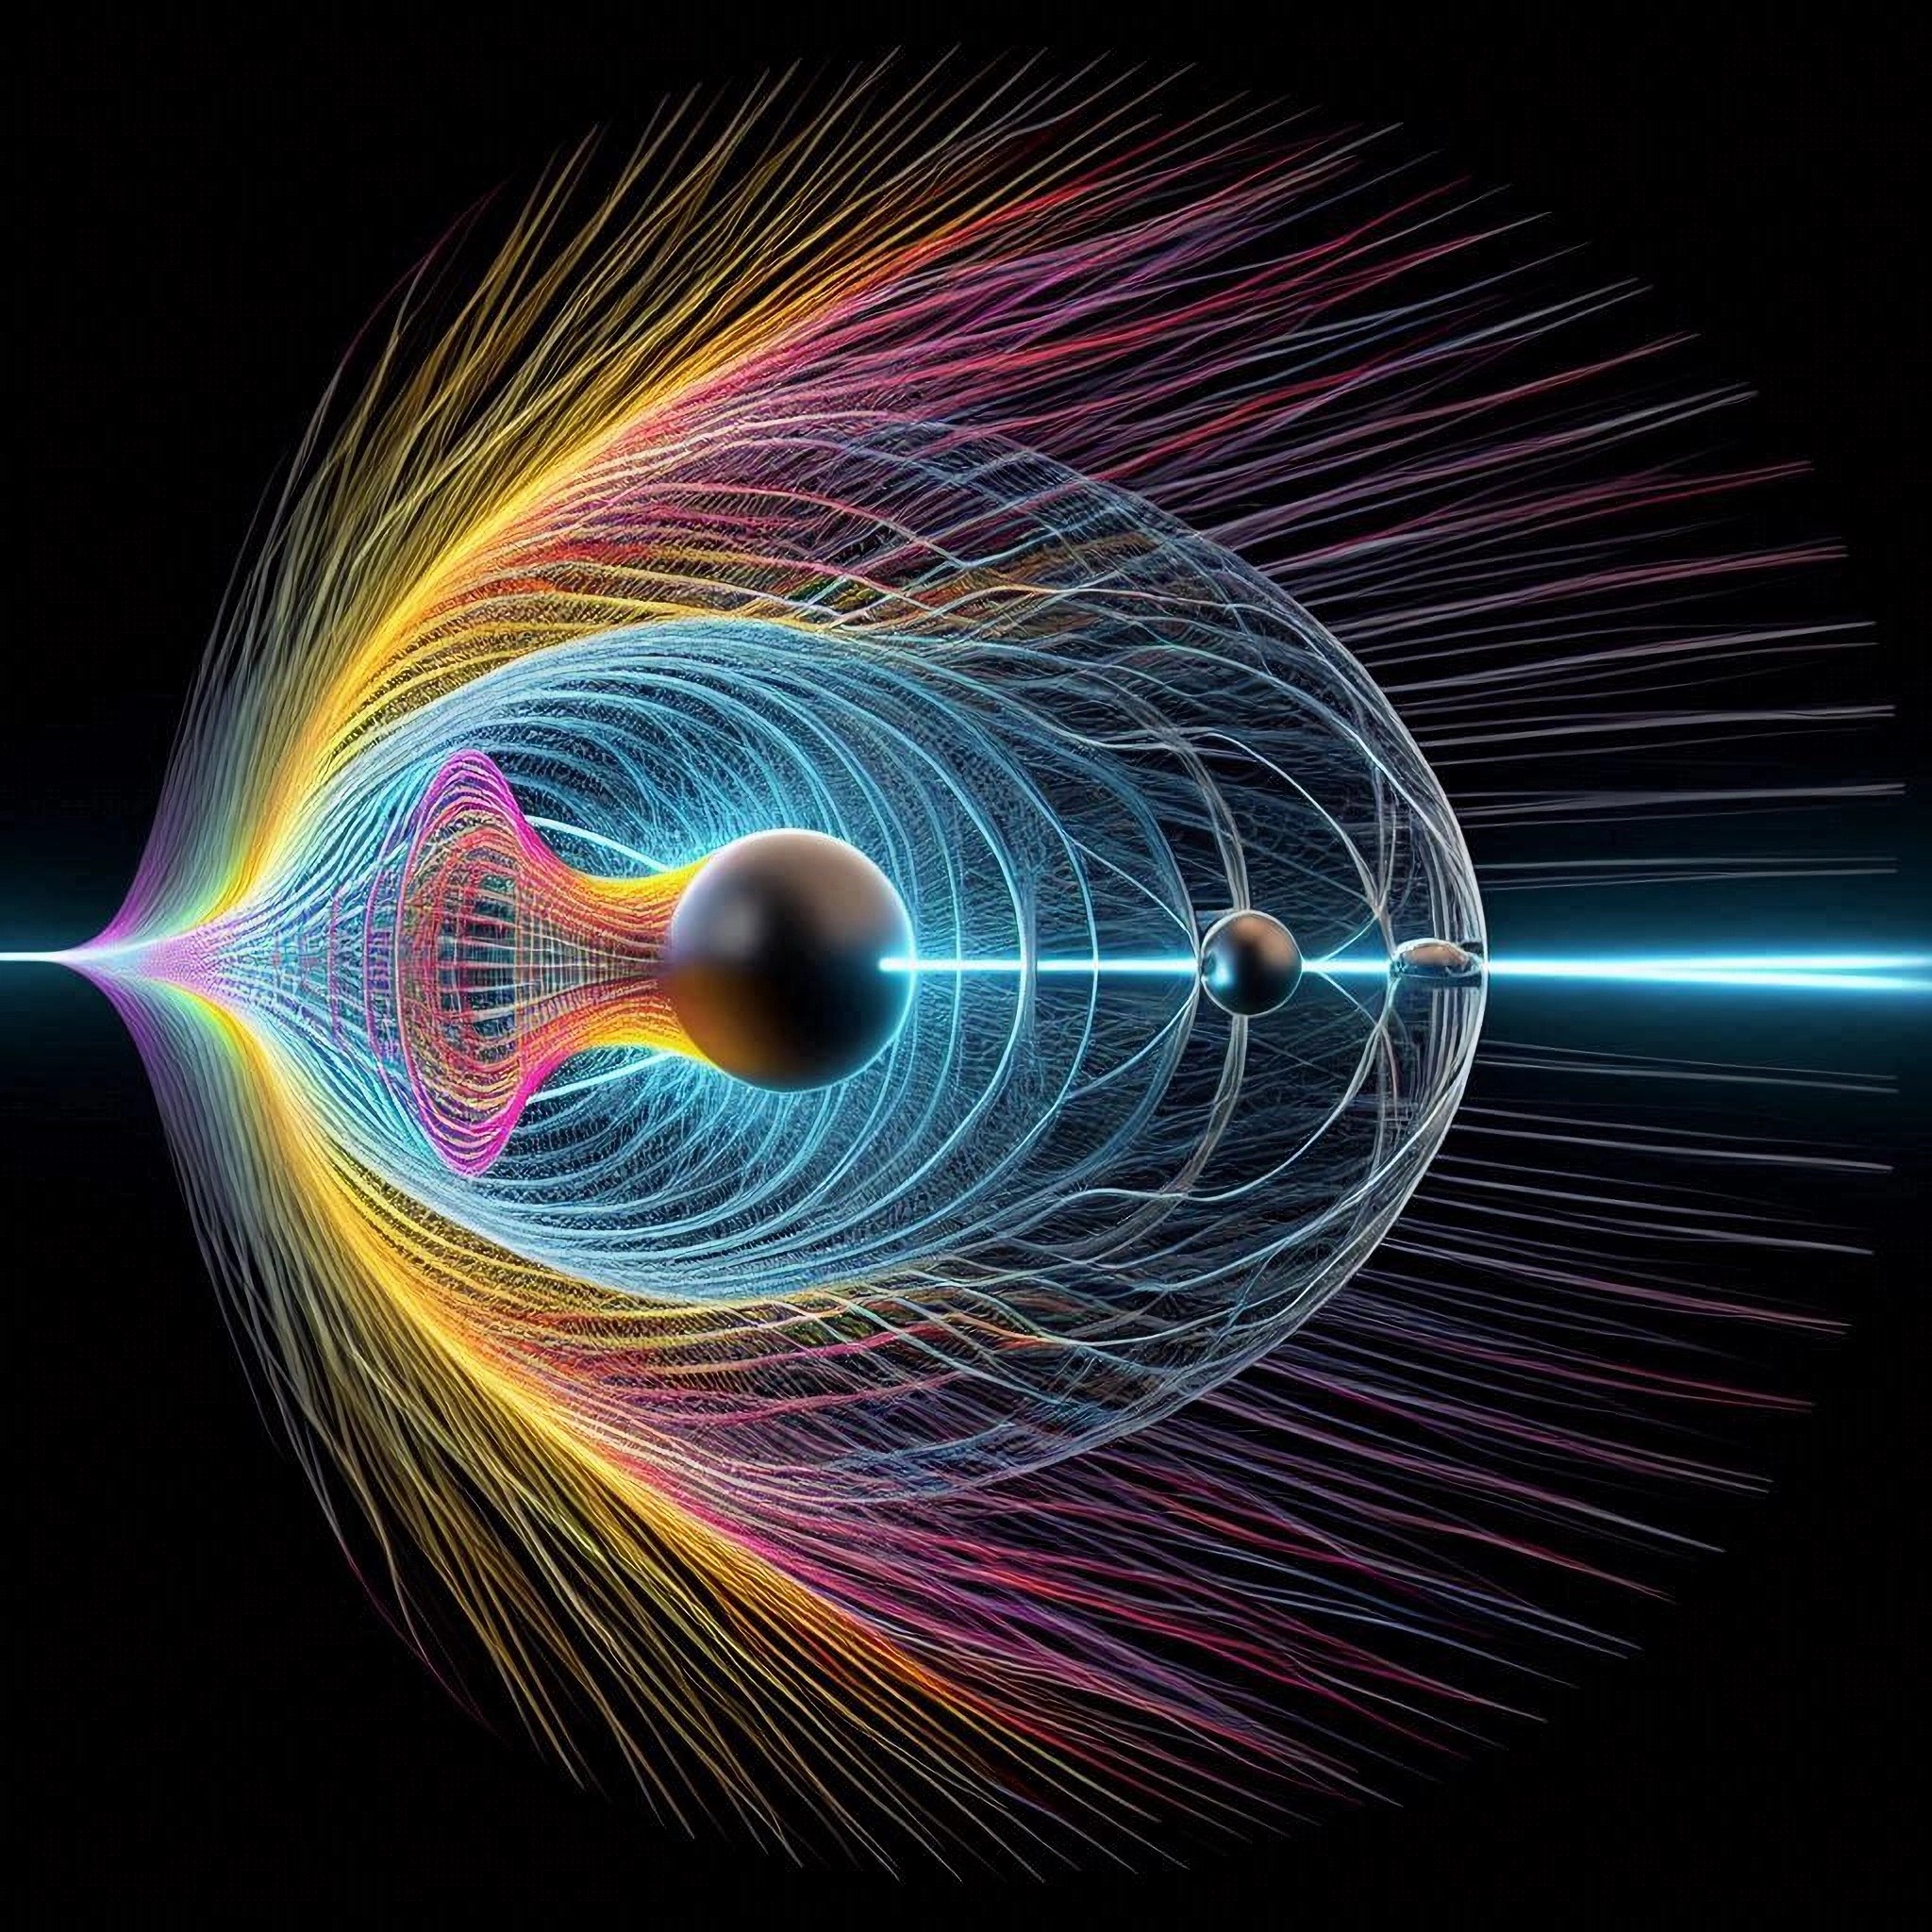 Faster than the speed of light: Tachyon proved compatible with Einstein’s theory of relativity